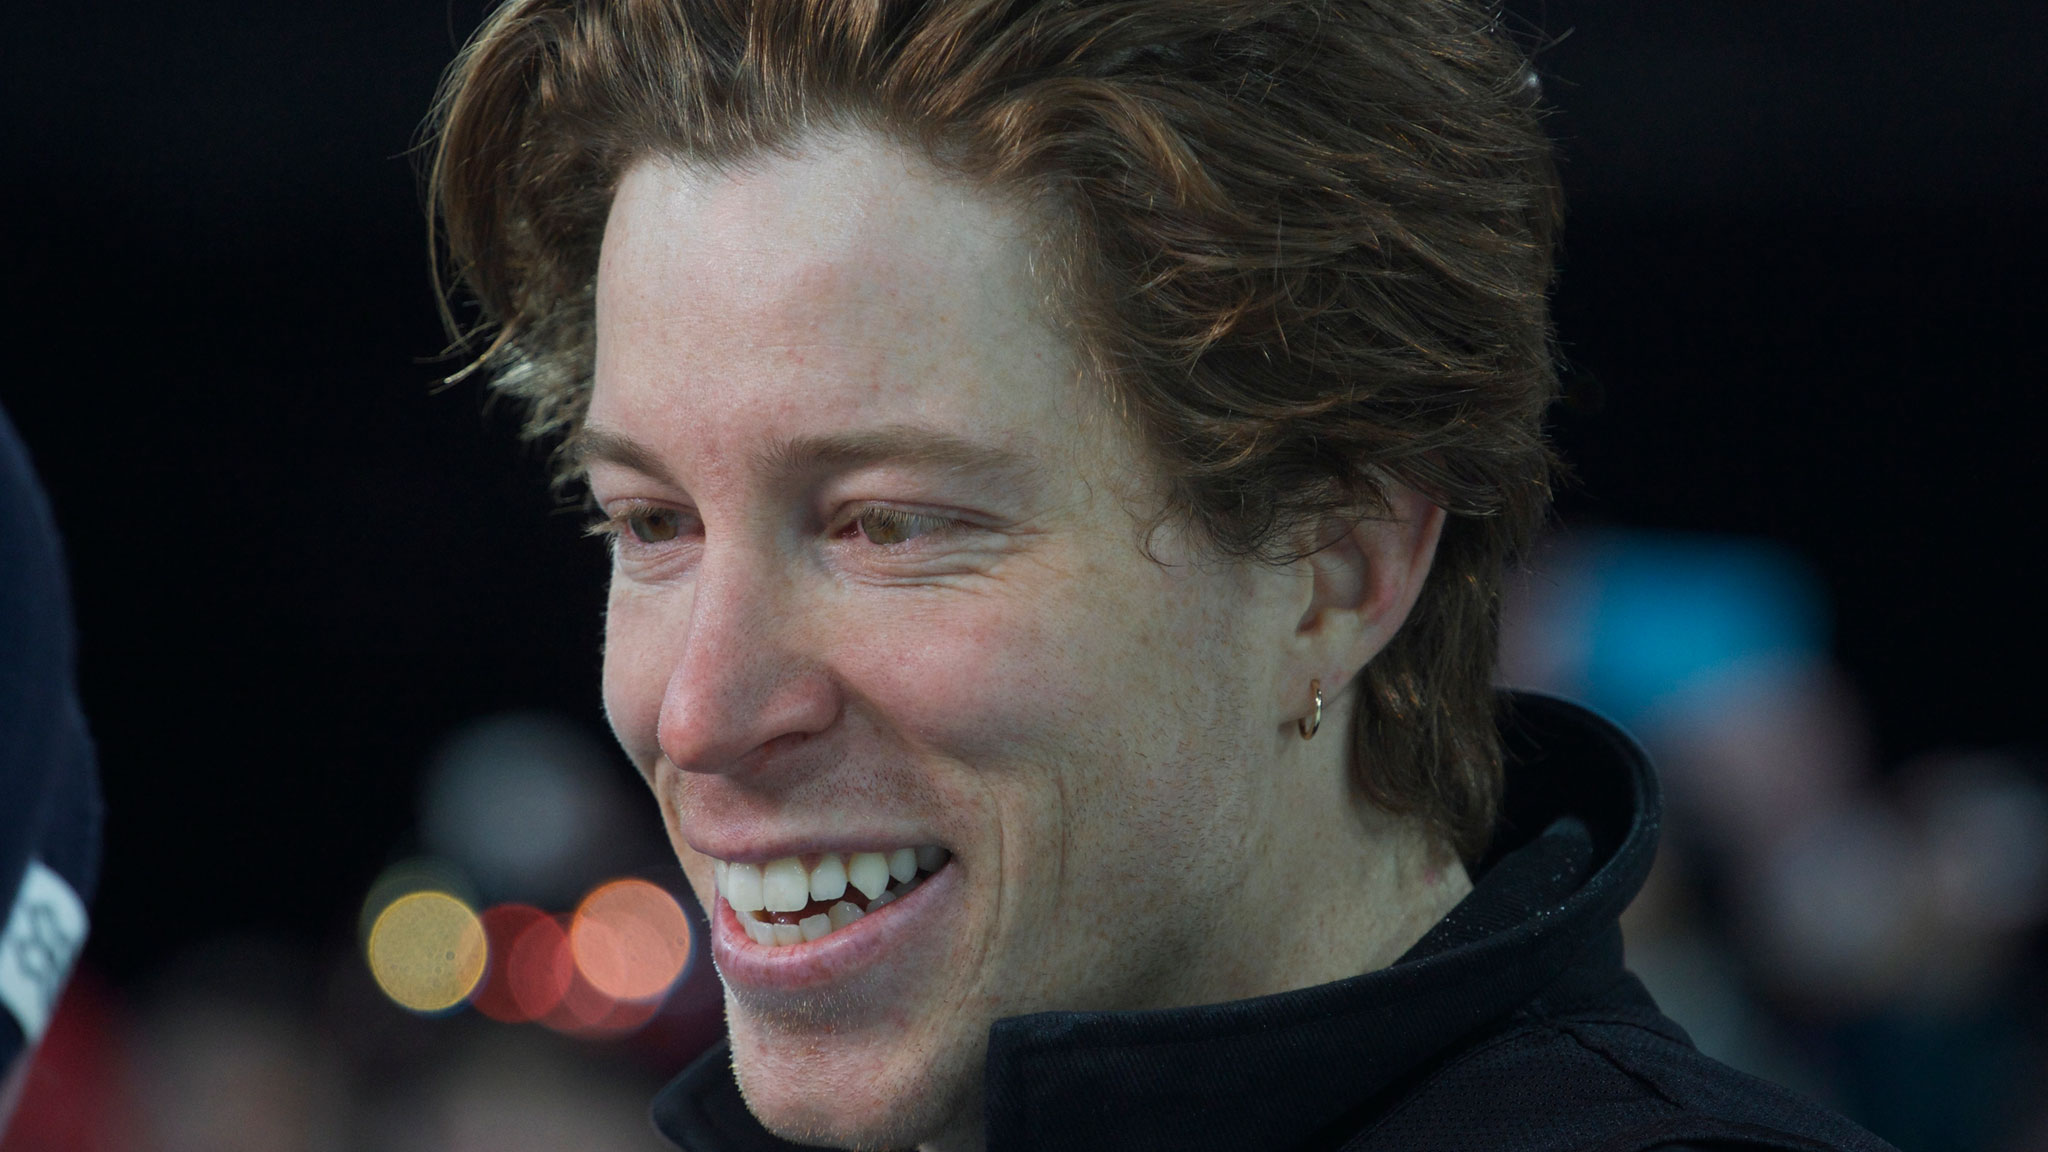 Shaun White skipped X Games Aspen this year to focus on training for the Olympics.